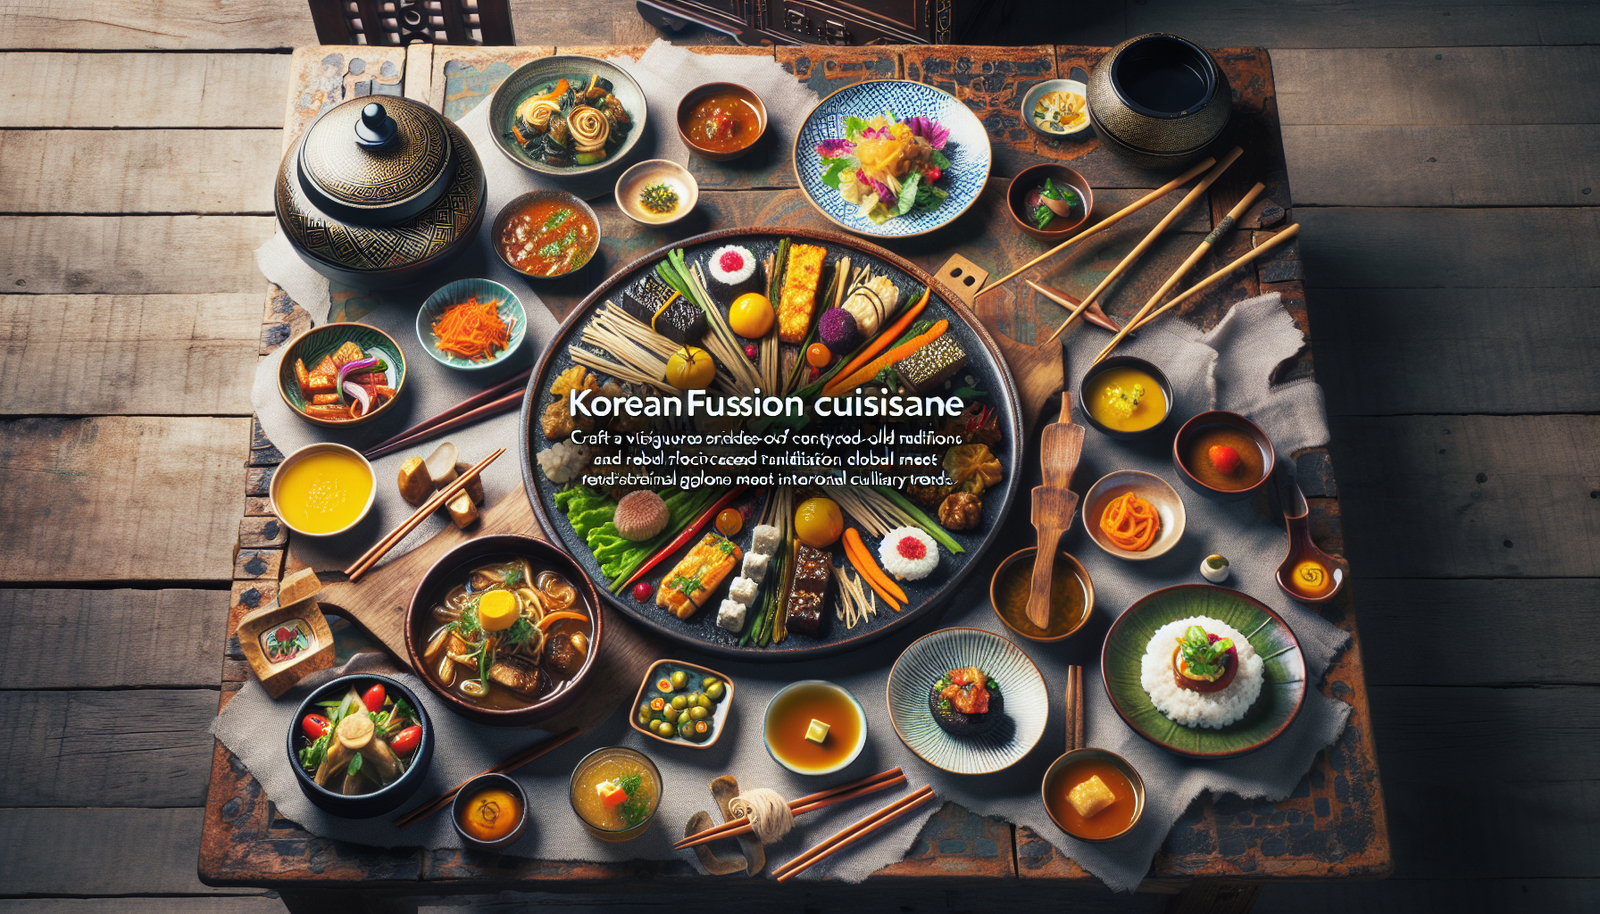 What Are The Cultural And Historical Influences On Modern Korean Fusion Cuisine?